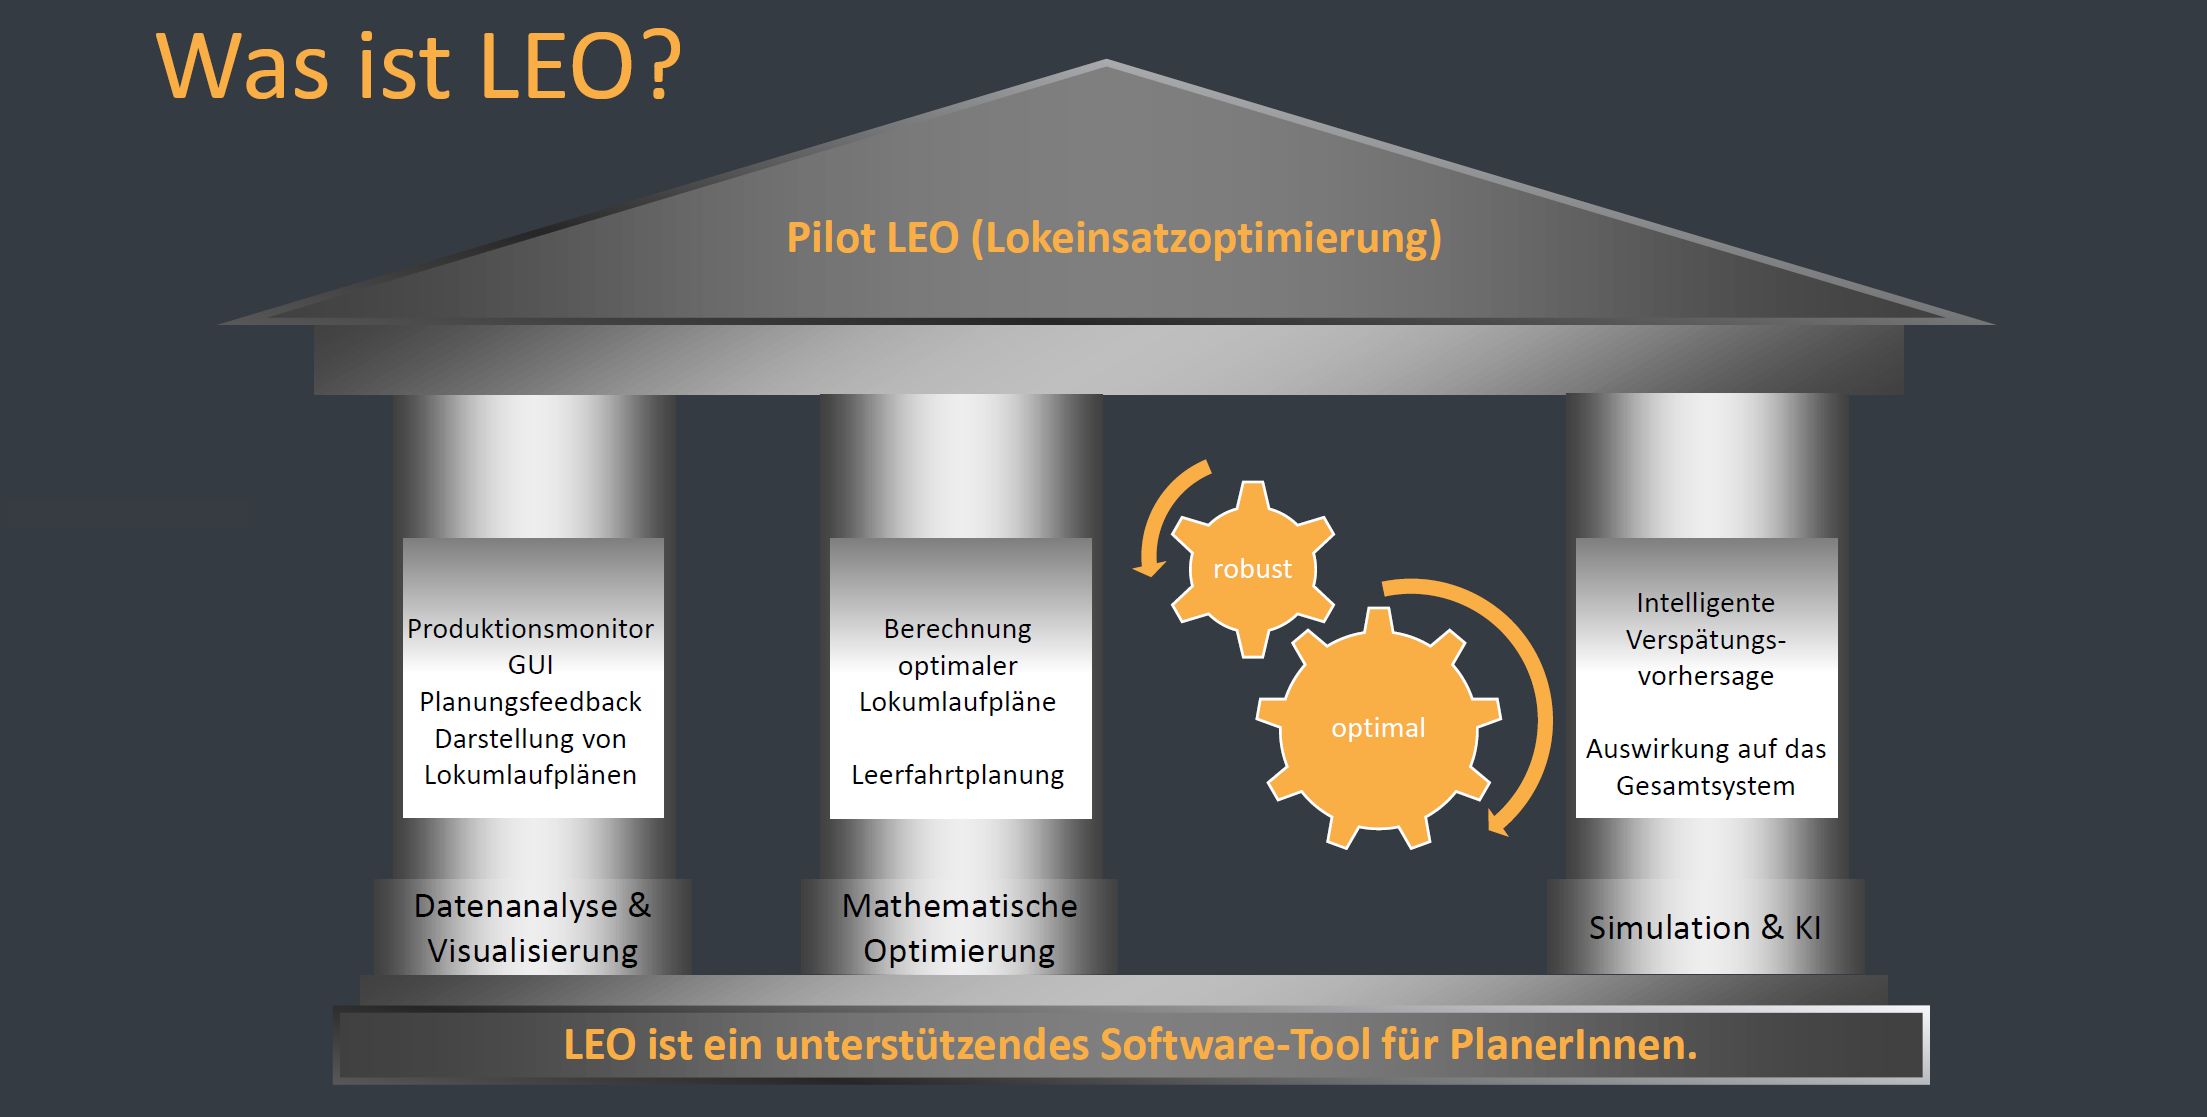 Structure of the Pilot LEO Software Tool with the three pillars “Data Analysis & Visualization”, “Mathematical Optimization” and “Simulation & AI”